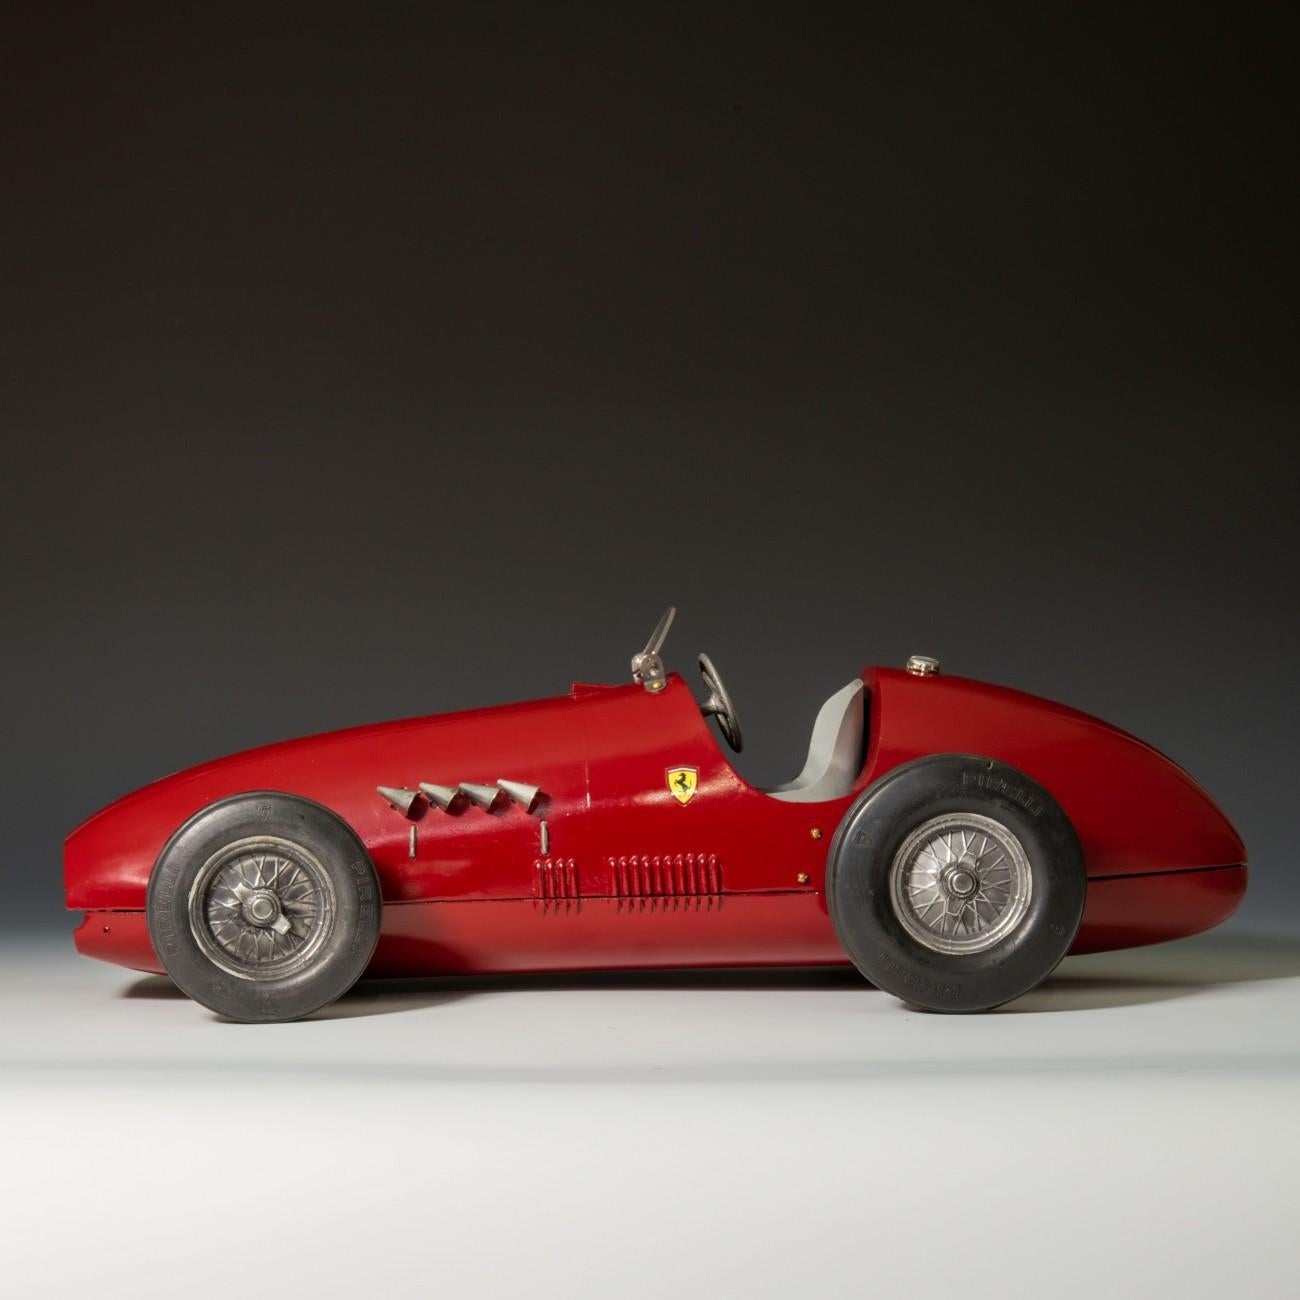 A terrific 1950s model Ferrari F500 F2:
During the 1952 season Alberto Ascari and his Ferrari F500 F2 were in a class of their own; he dominated the world championship, winning each of the six Grands Prix he entered that year. Over 1952 and 1953 he